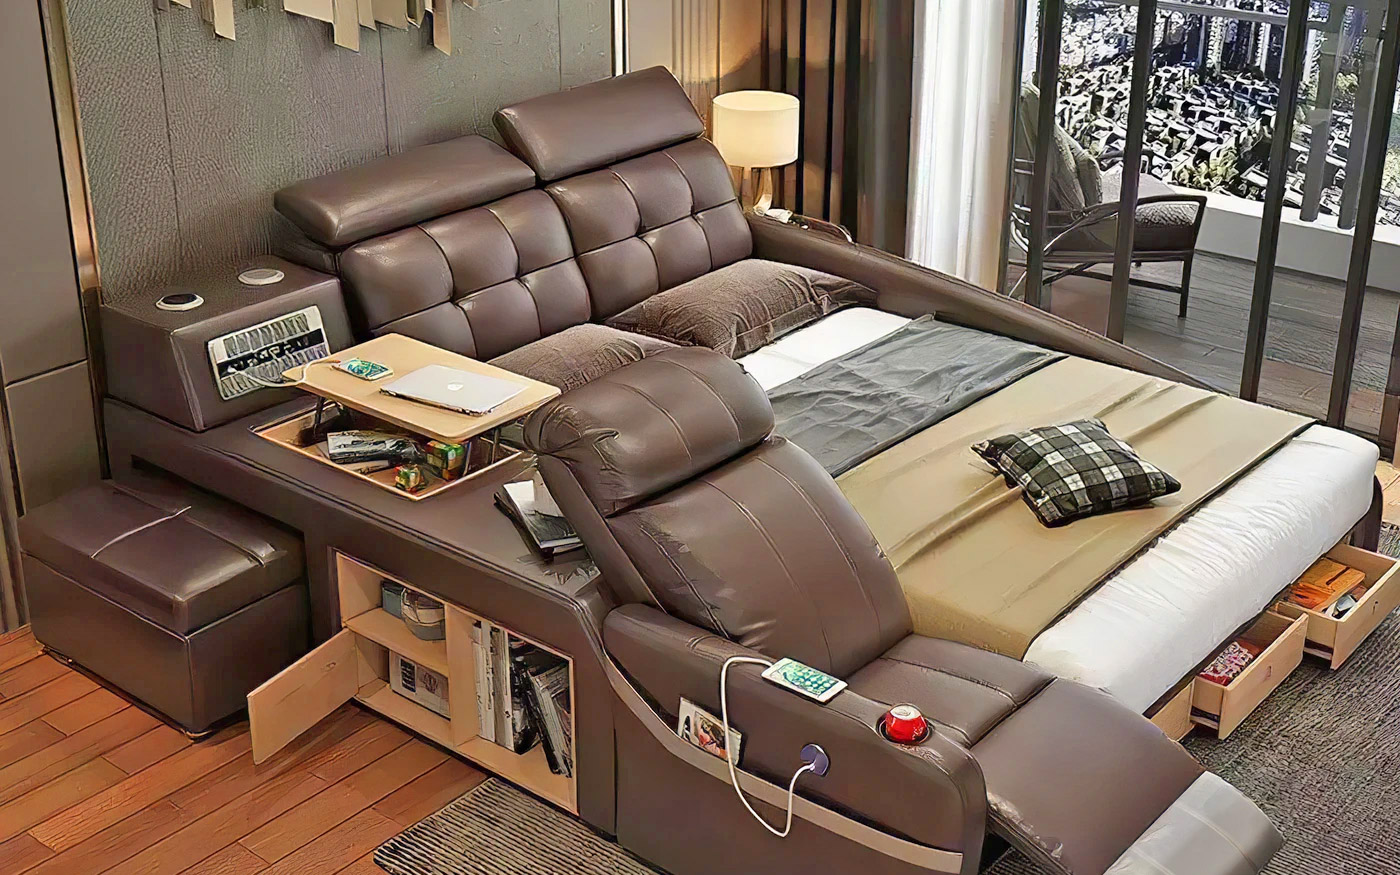 All-In-One Smart Bed Has An Integrated Recliner and Air Filtration System